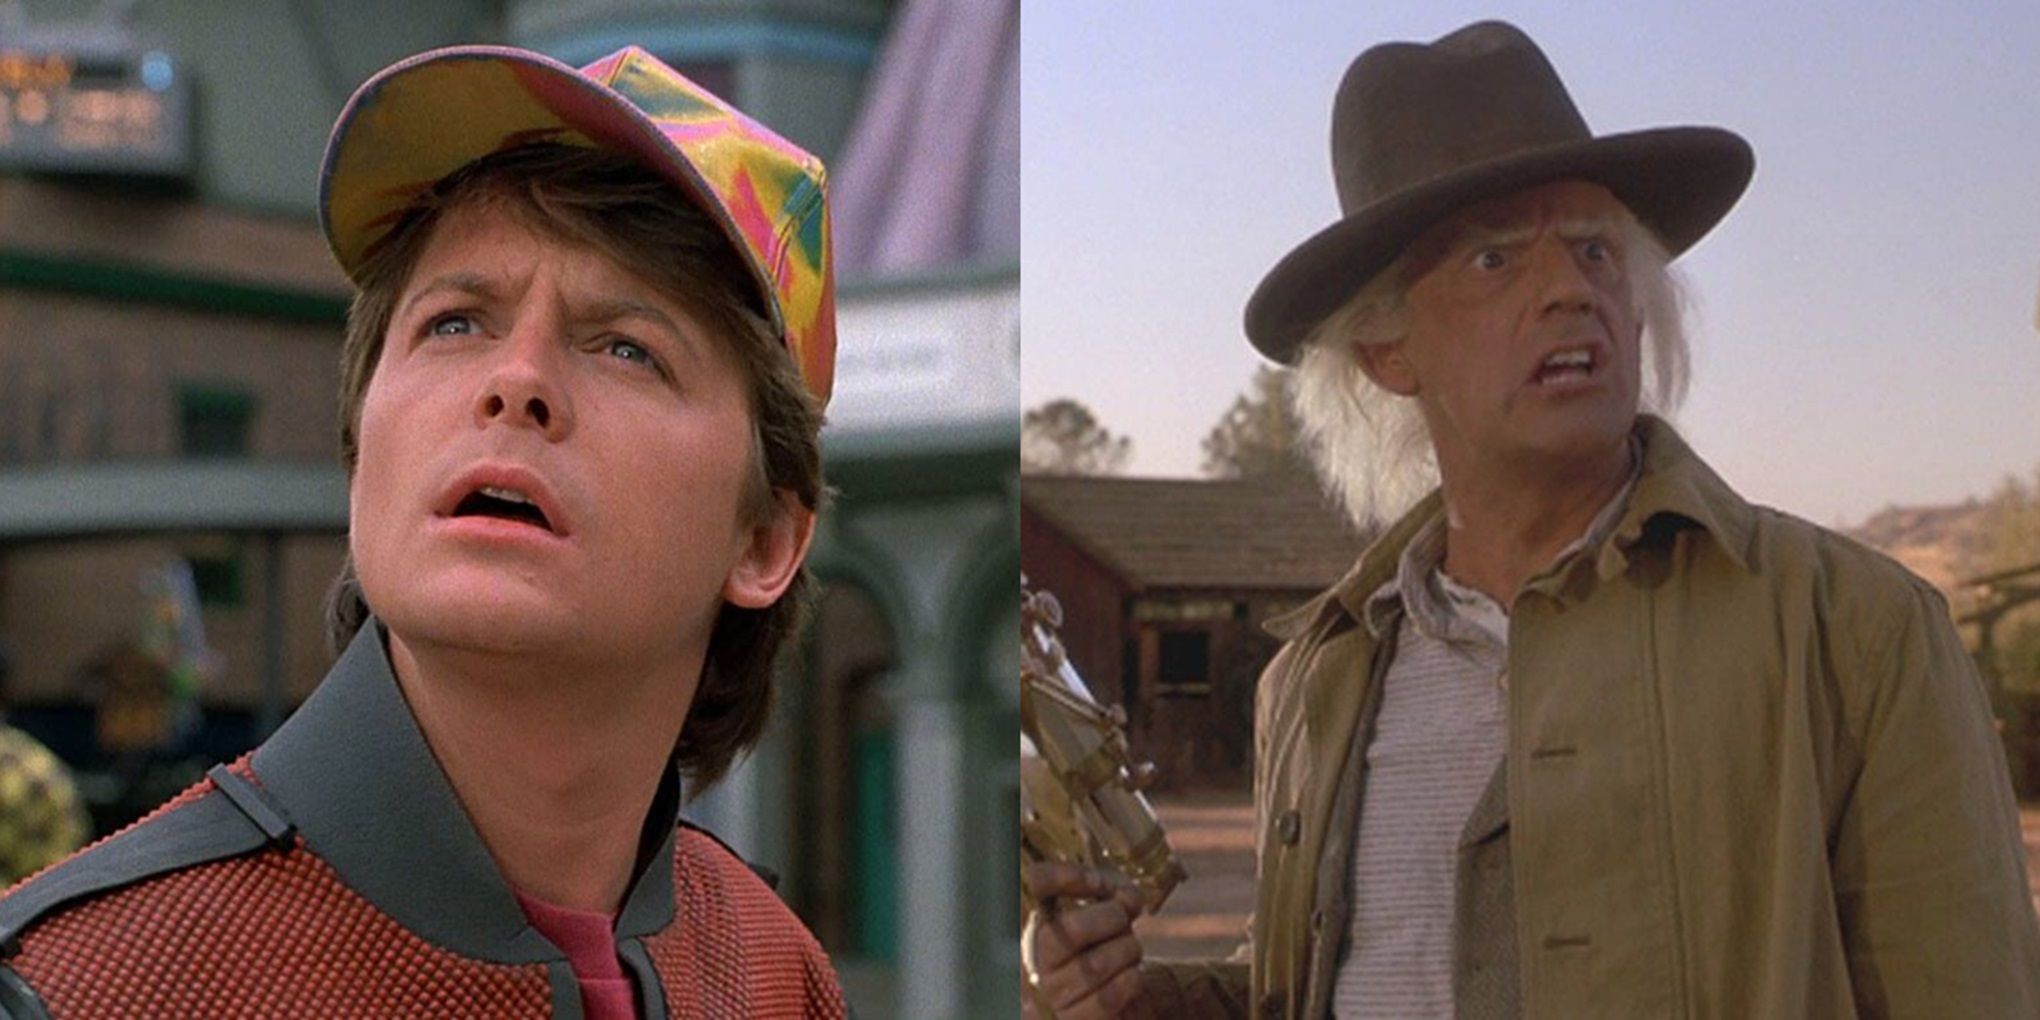 Back To The Future Sequels 5 Things They Got Right (& 5 That Missed The Mark)